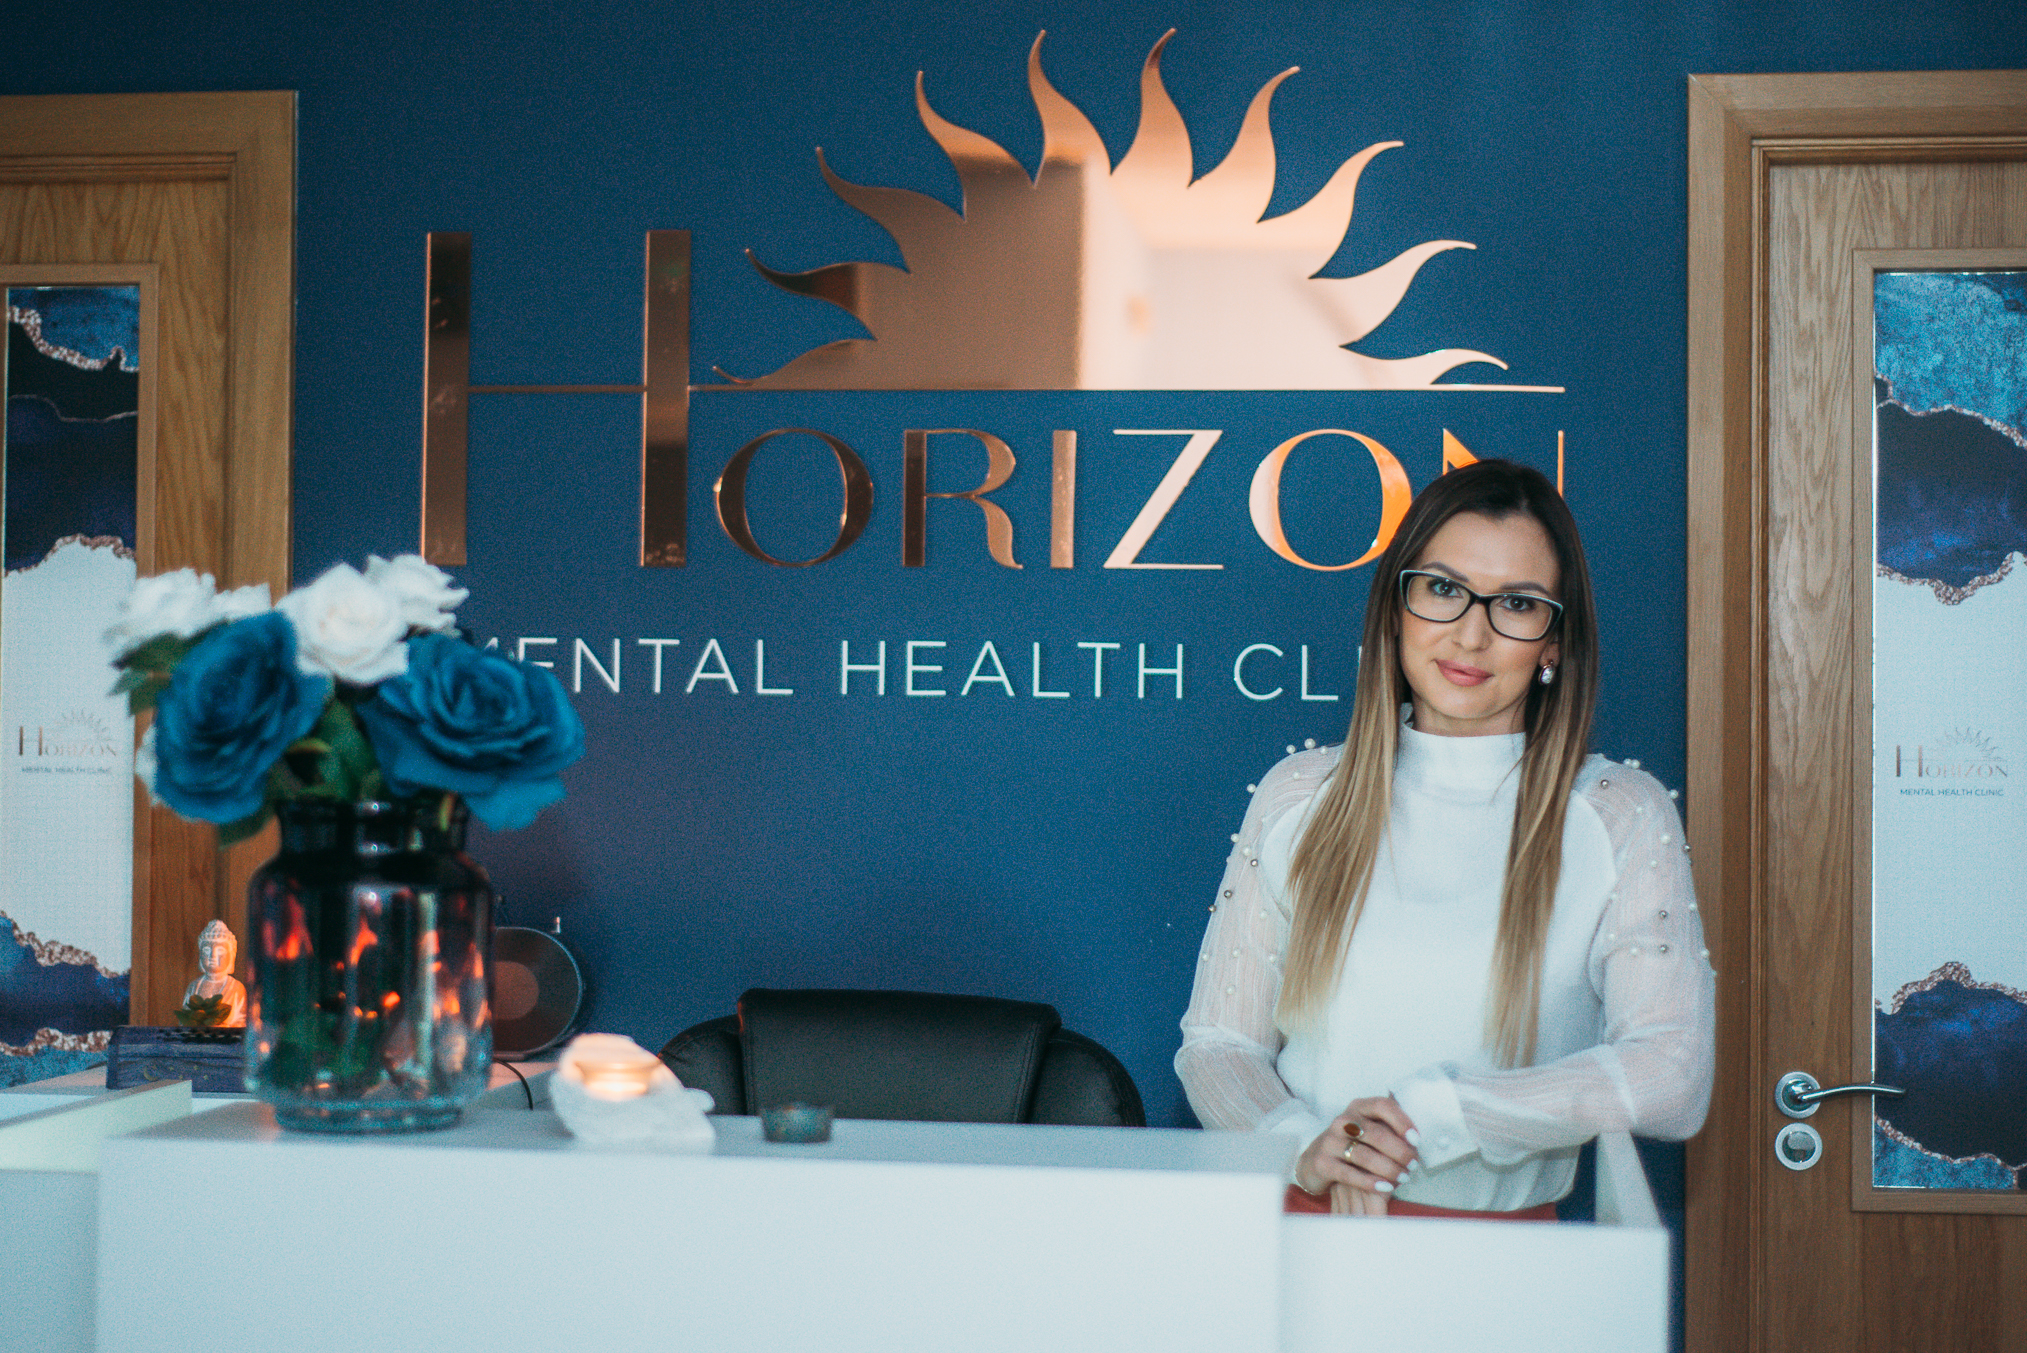 Horizon Mental Health Clinic providing personalised psychotherapy services in Limerick